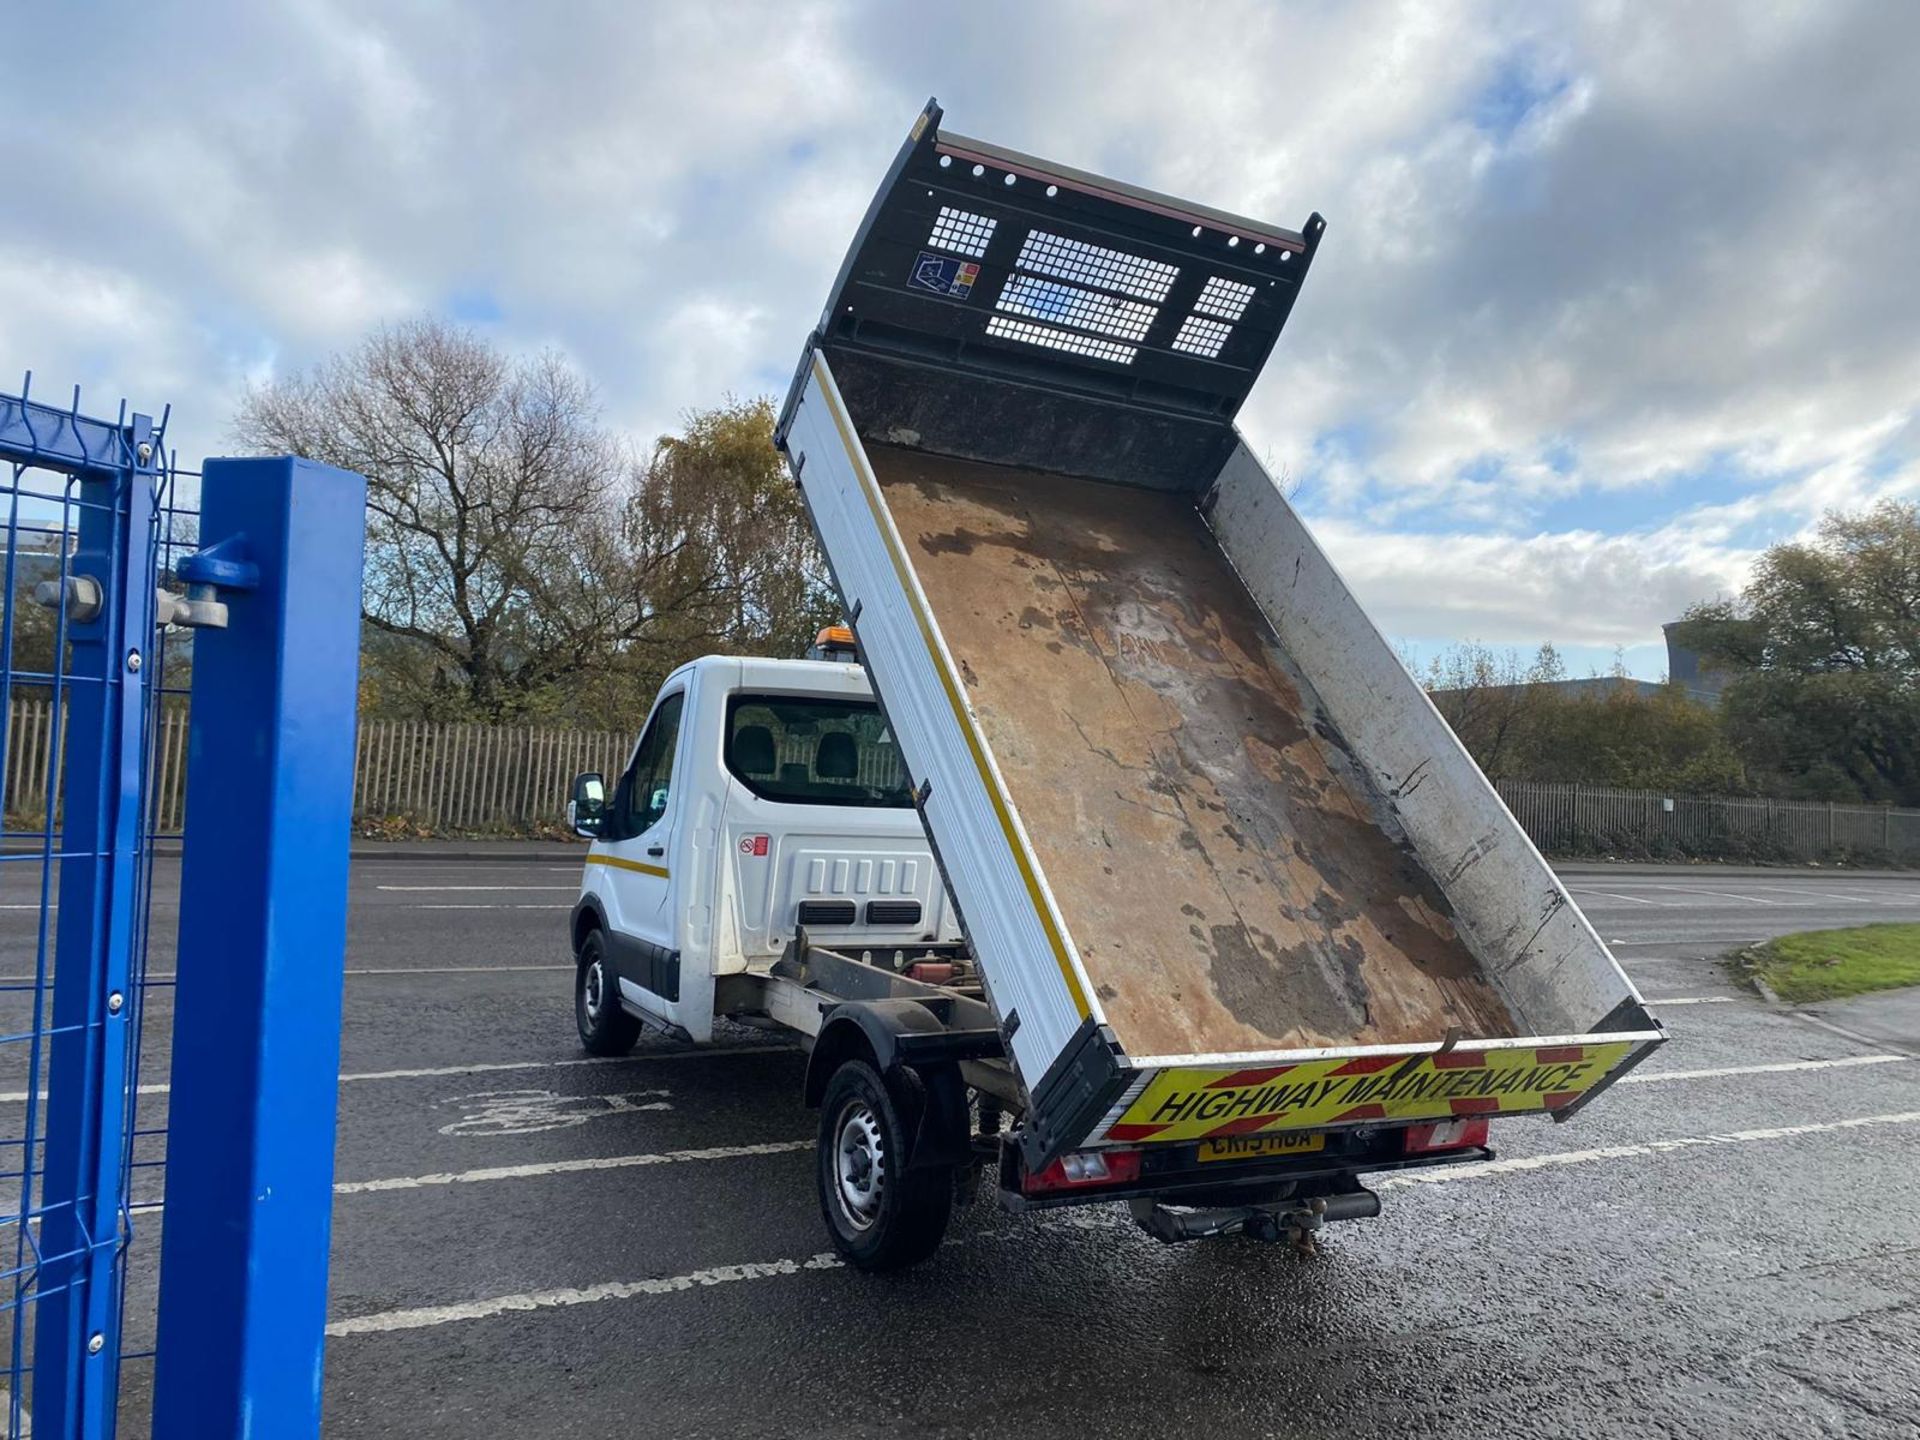 2019 19 FORD TRANSIT TIPPER - 83K MILES - FACTORY TIPPER - EURO 6. - Image 5 of 10